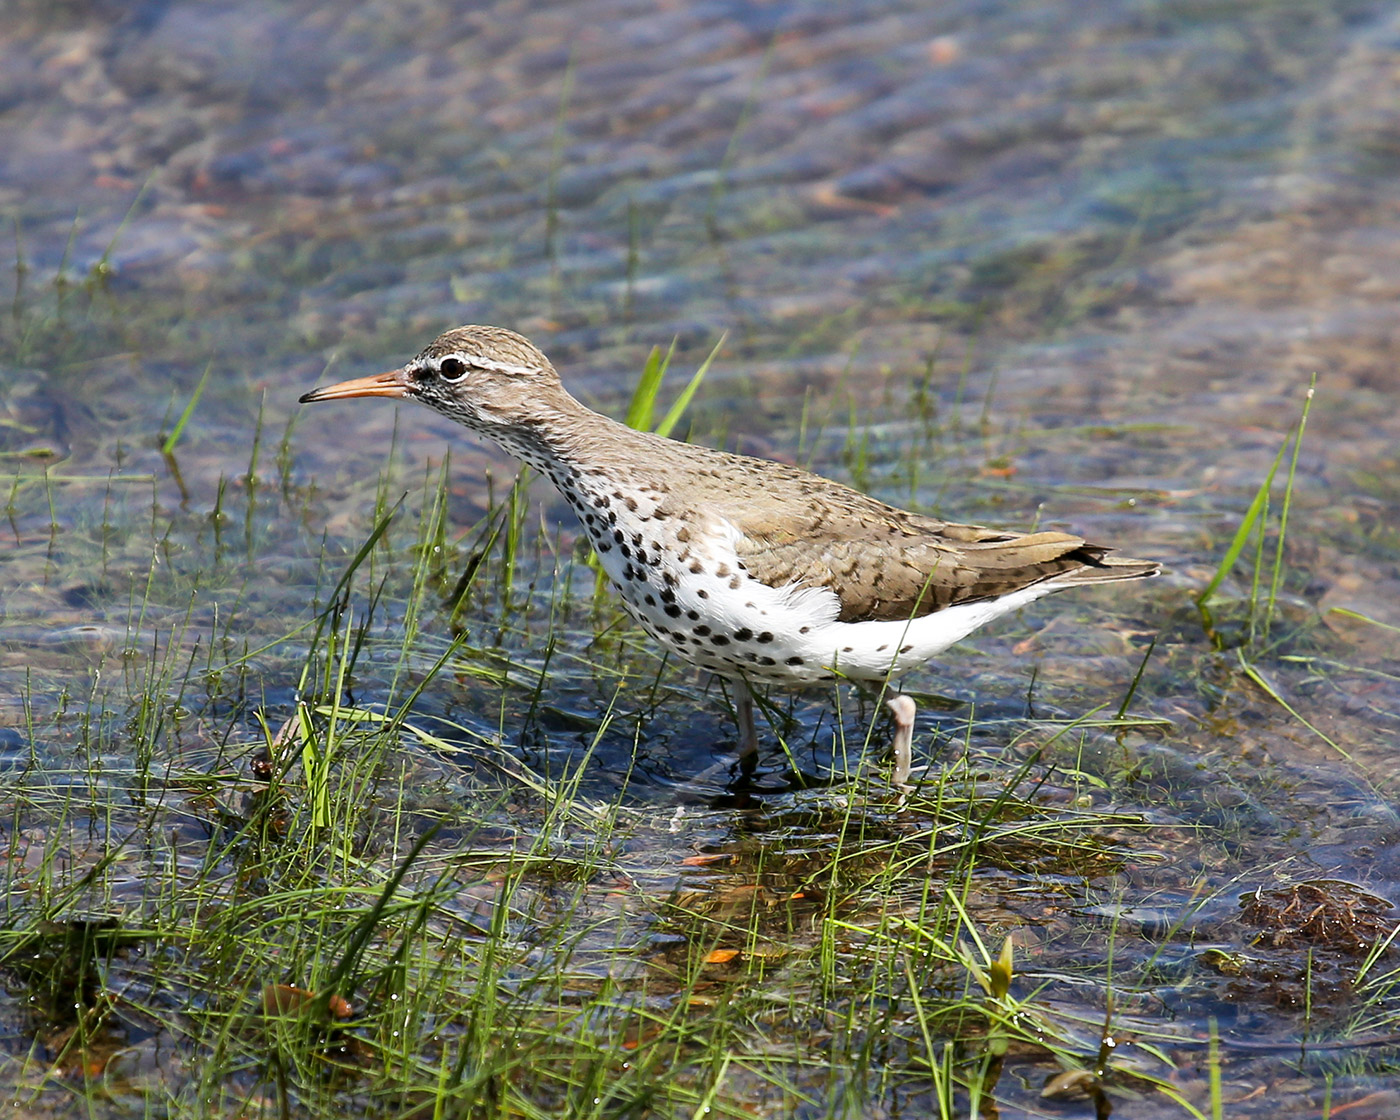 Spotted Sandpiper in Old Town, Maine